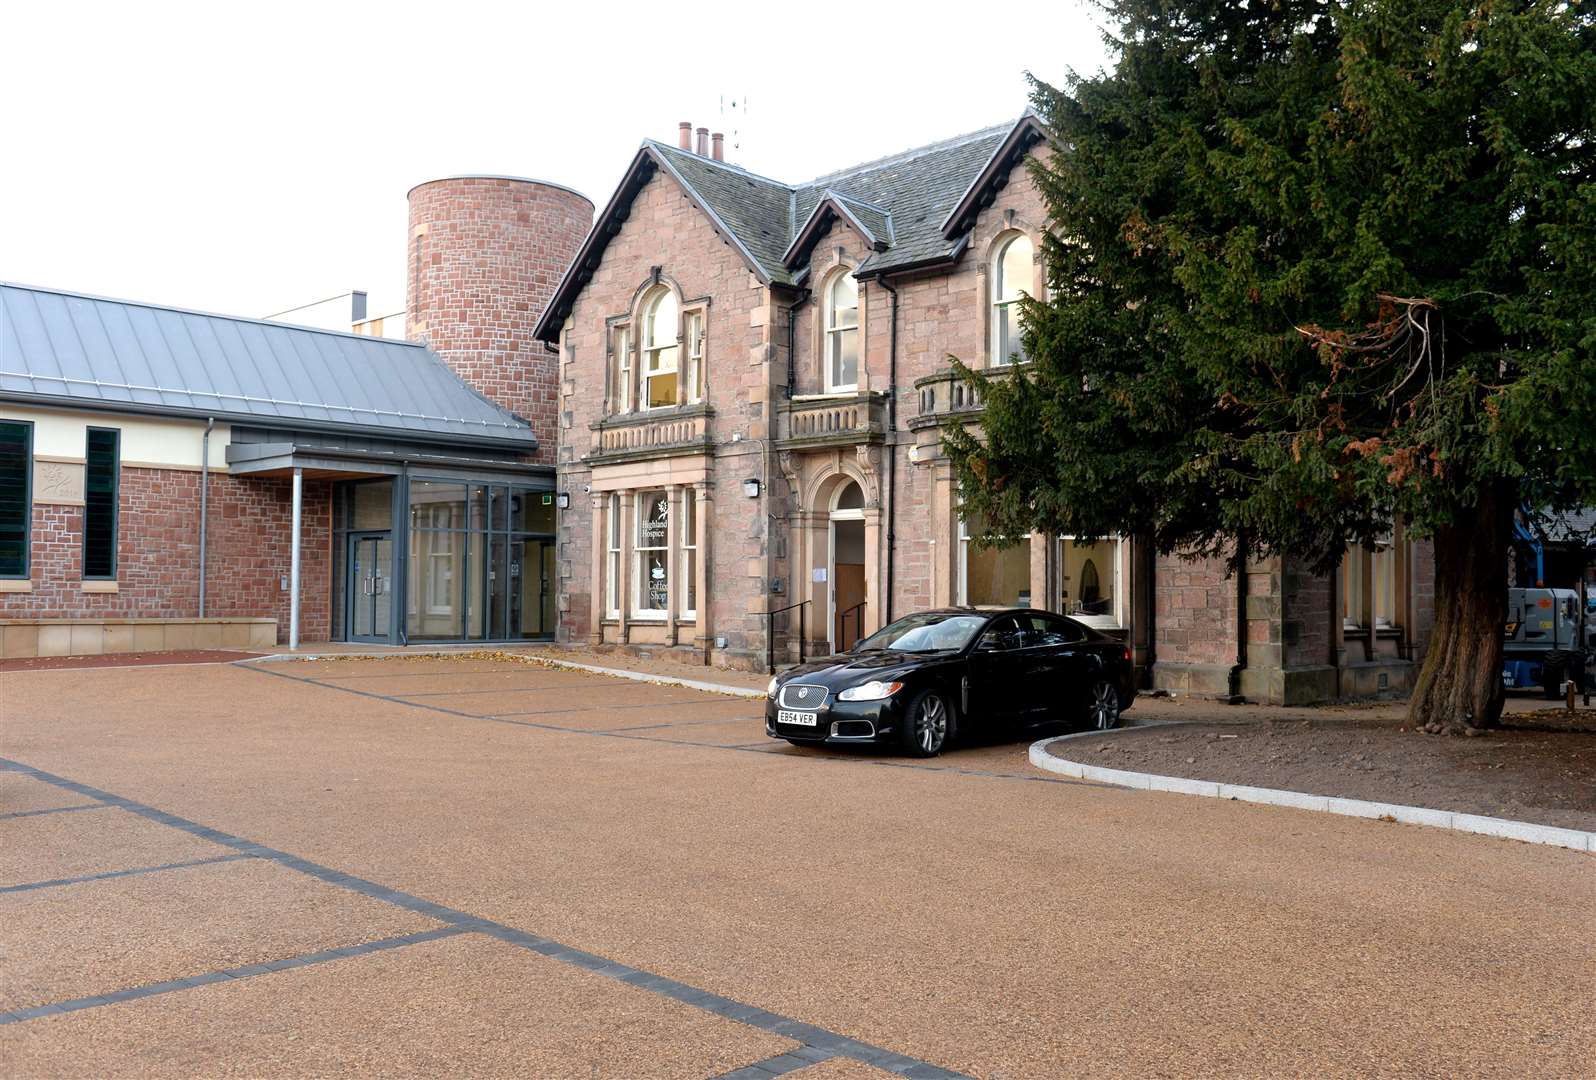 Highland Hospice headquarters in Inverness.